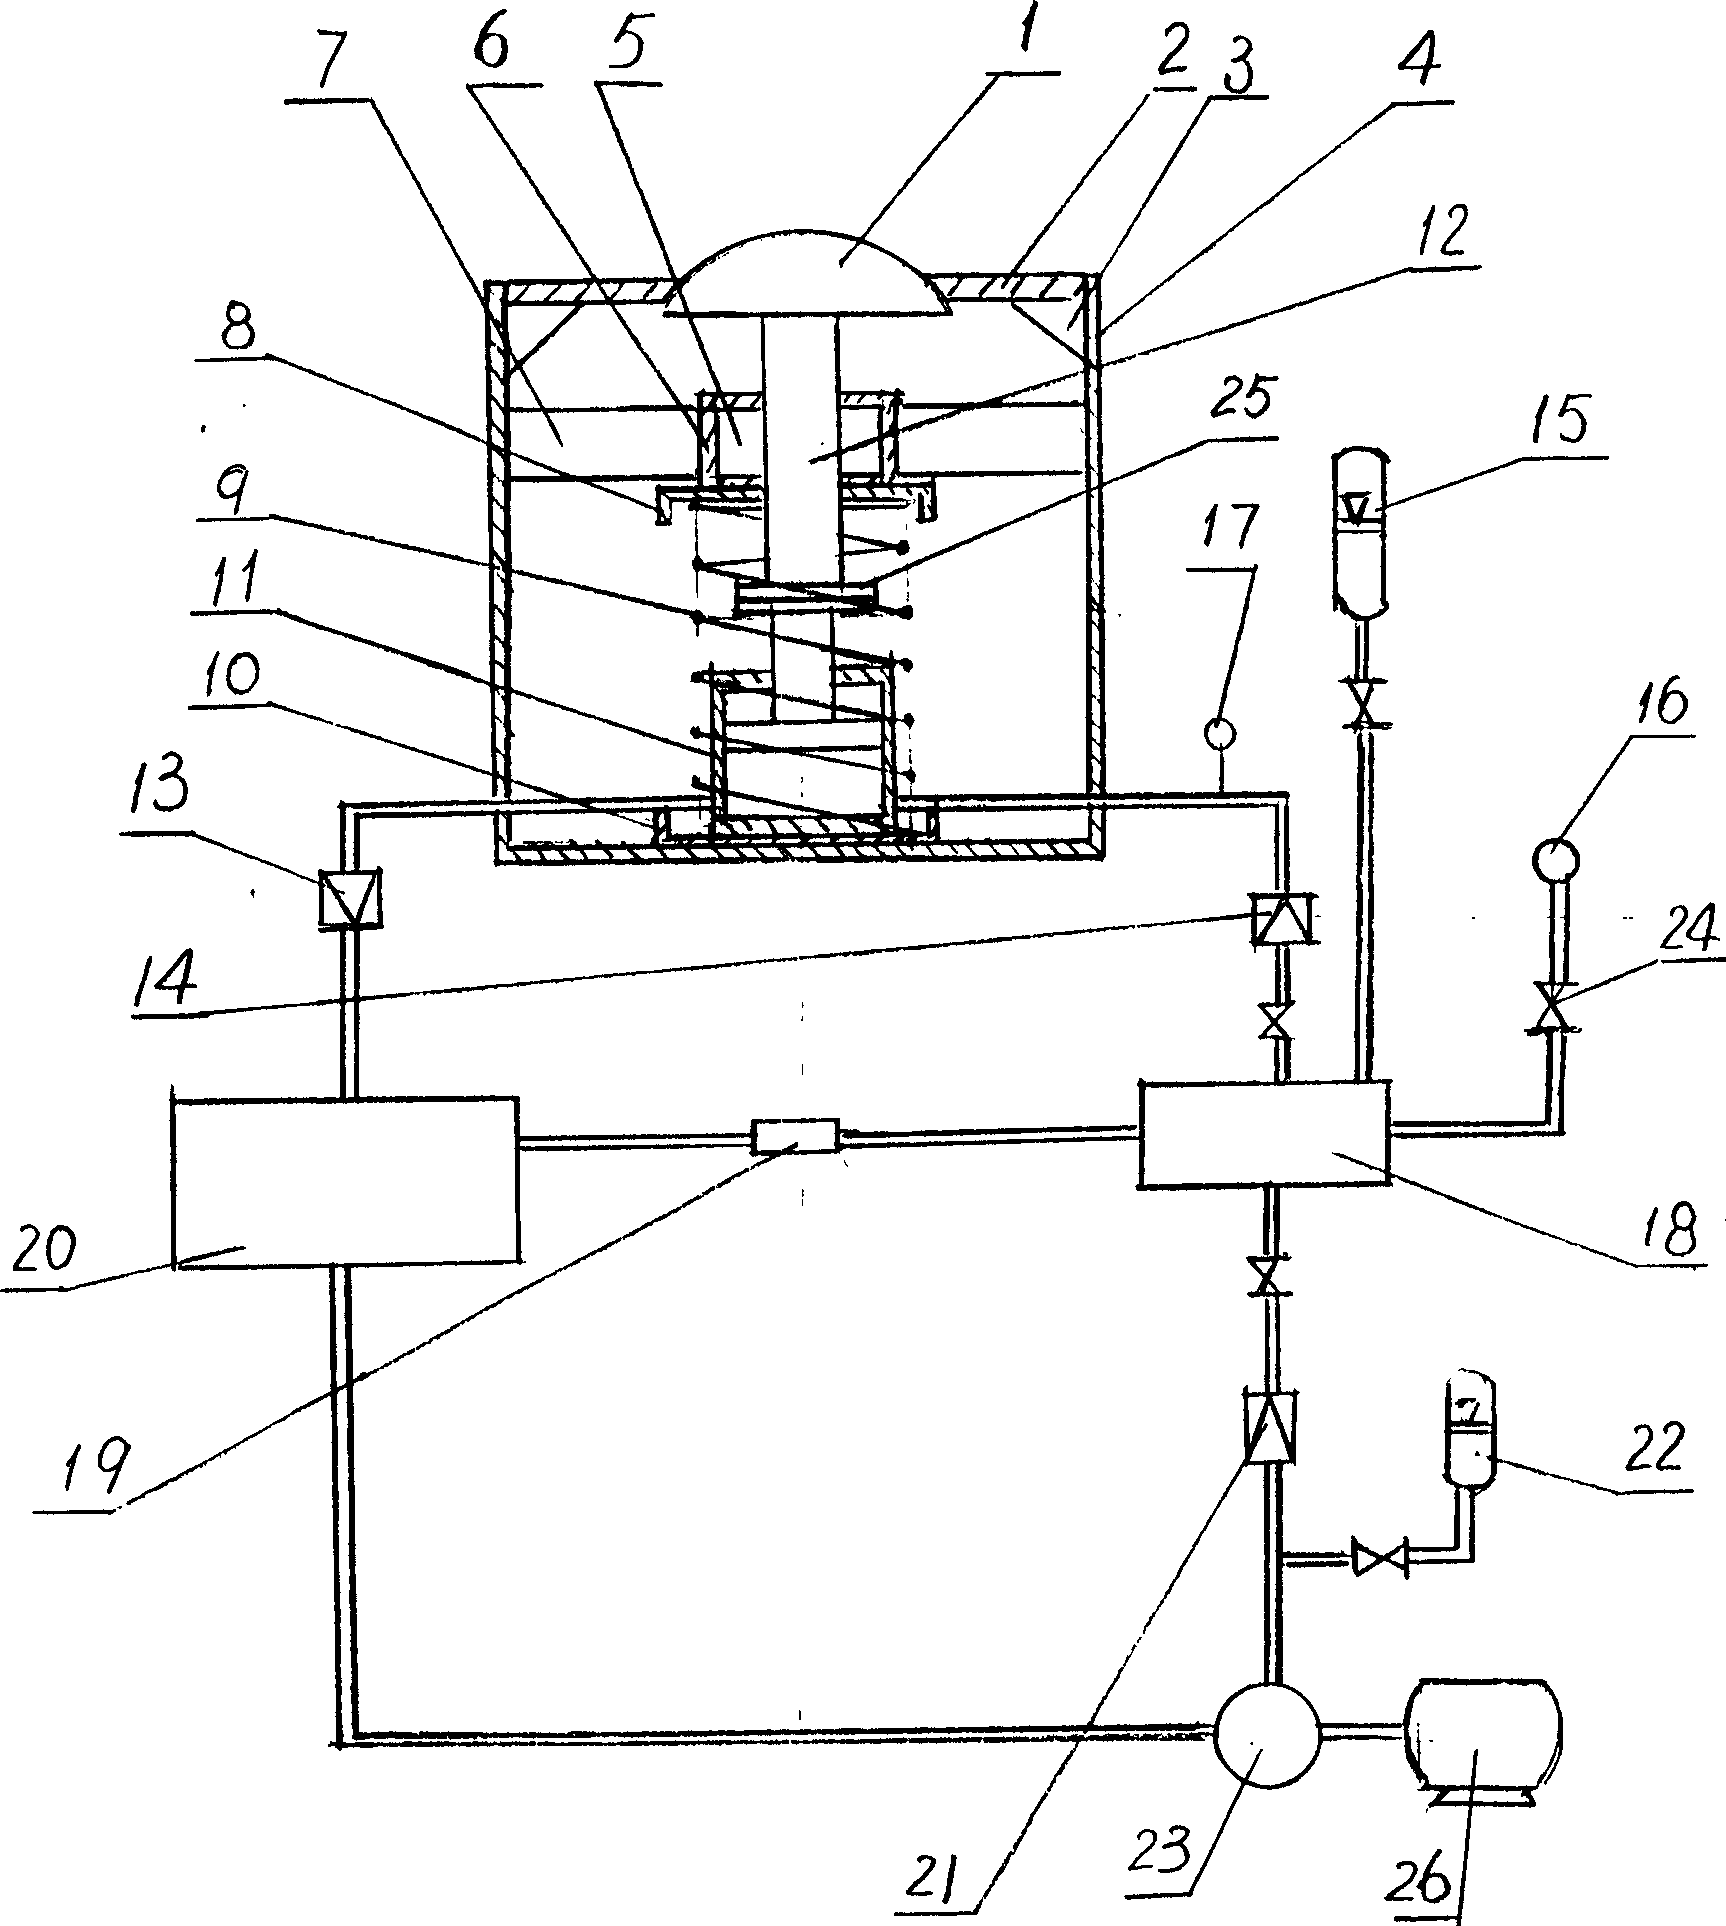 Generation power device by using road deceleration strip